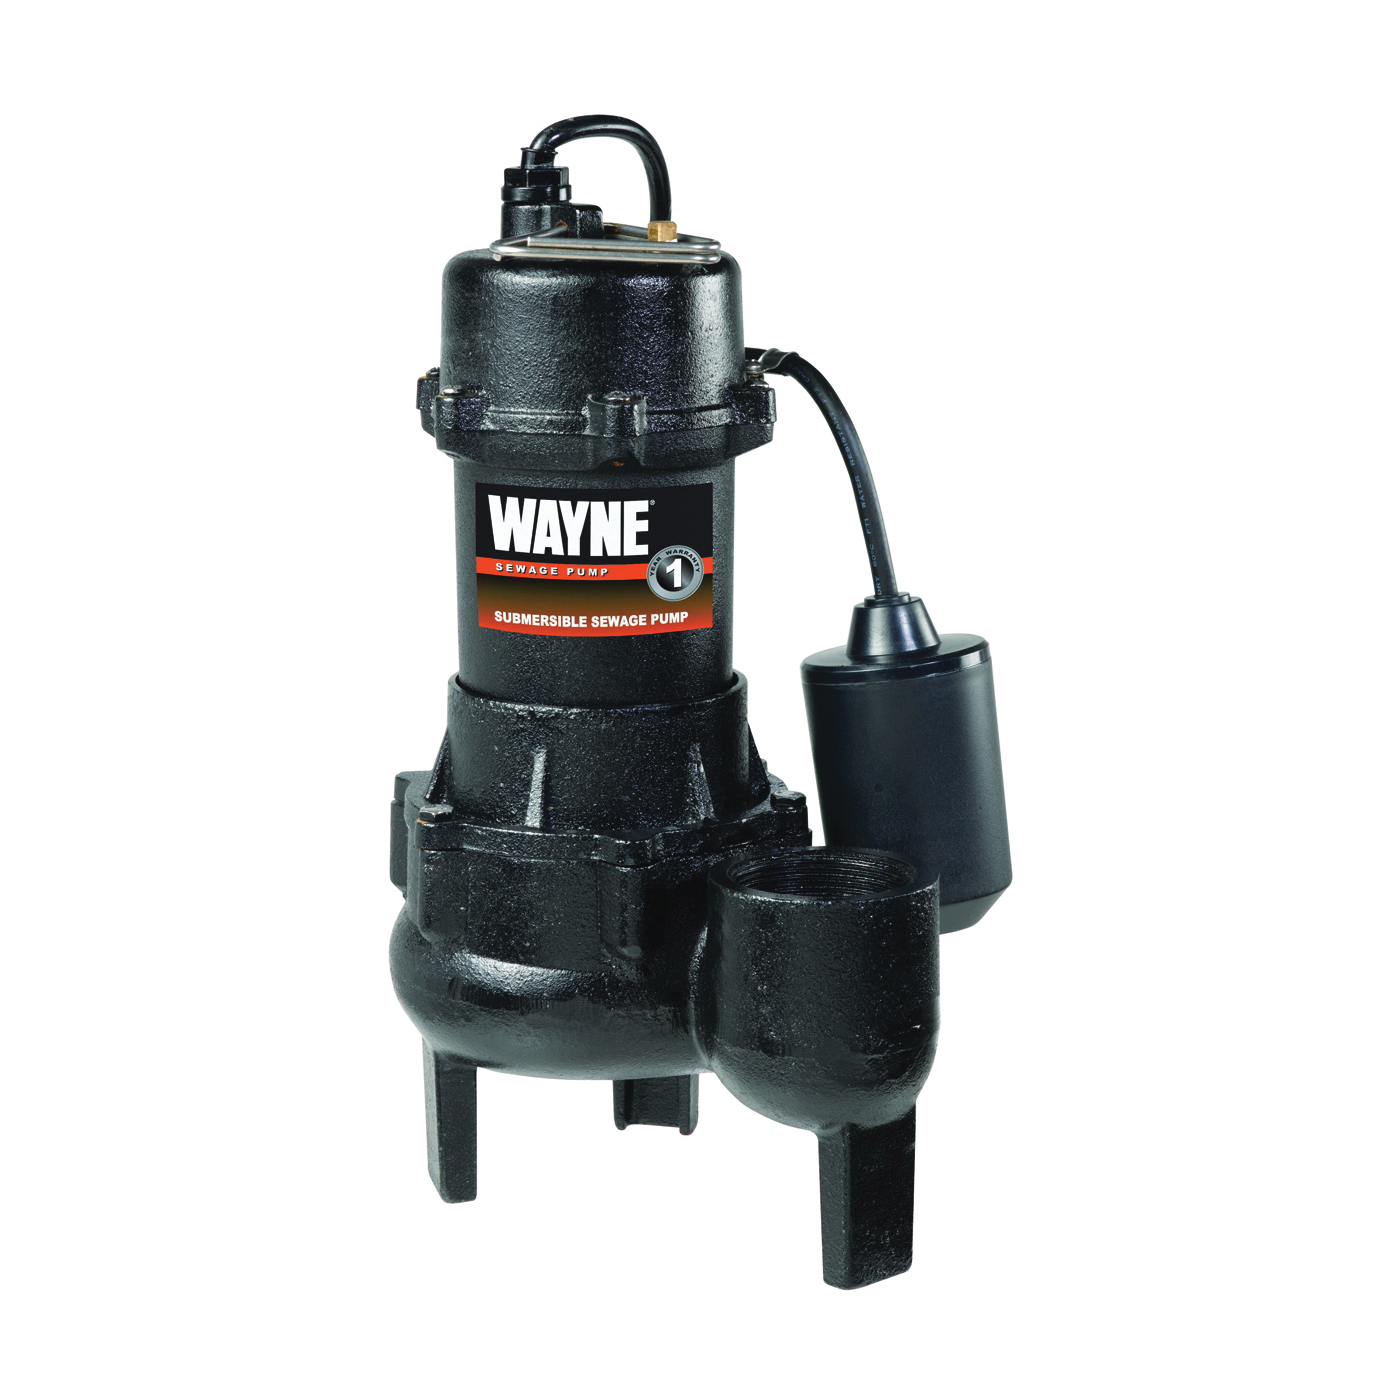 RPP50/SEL50 Sewage Pump, 1-Phase, 15 A, 115 V, 0.5 hp, 2 in Outlet, 20 ft Max Head, 10,000 gph, Iron